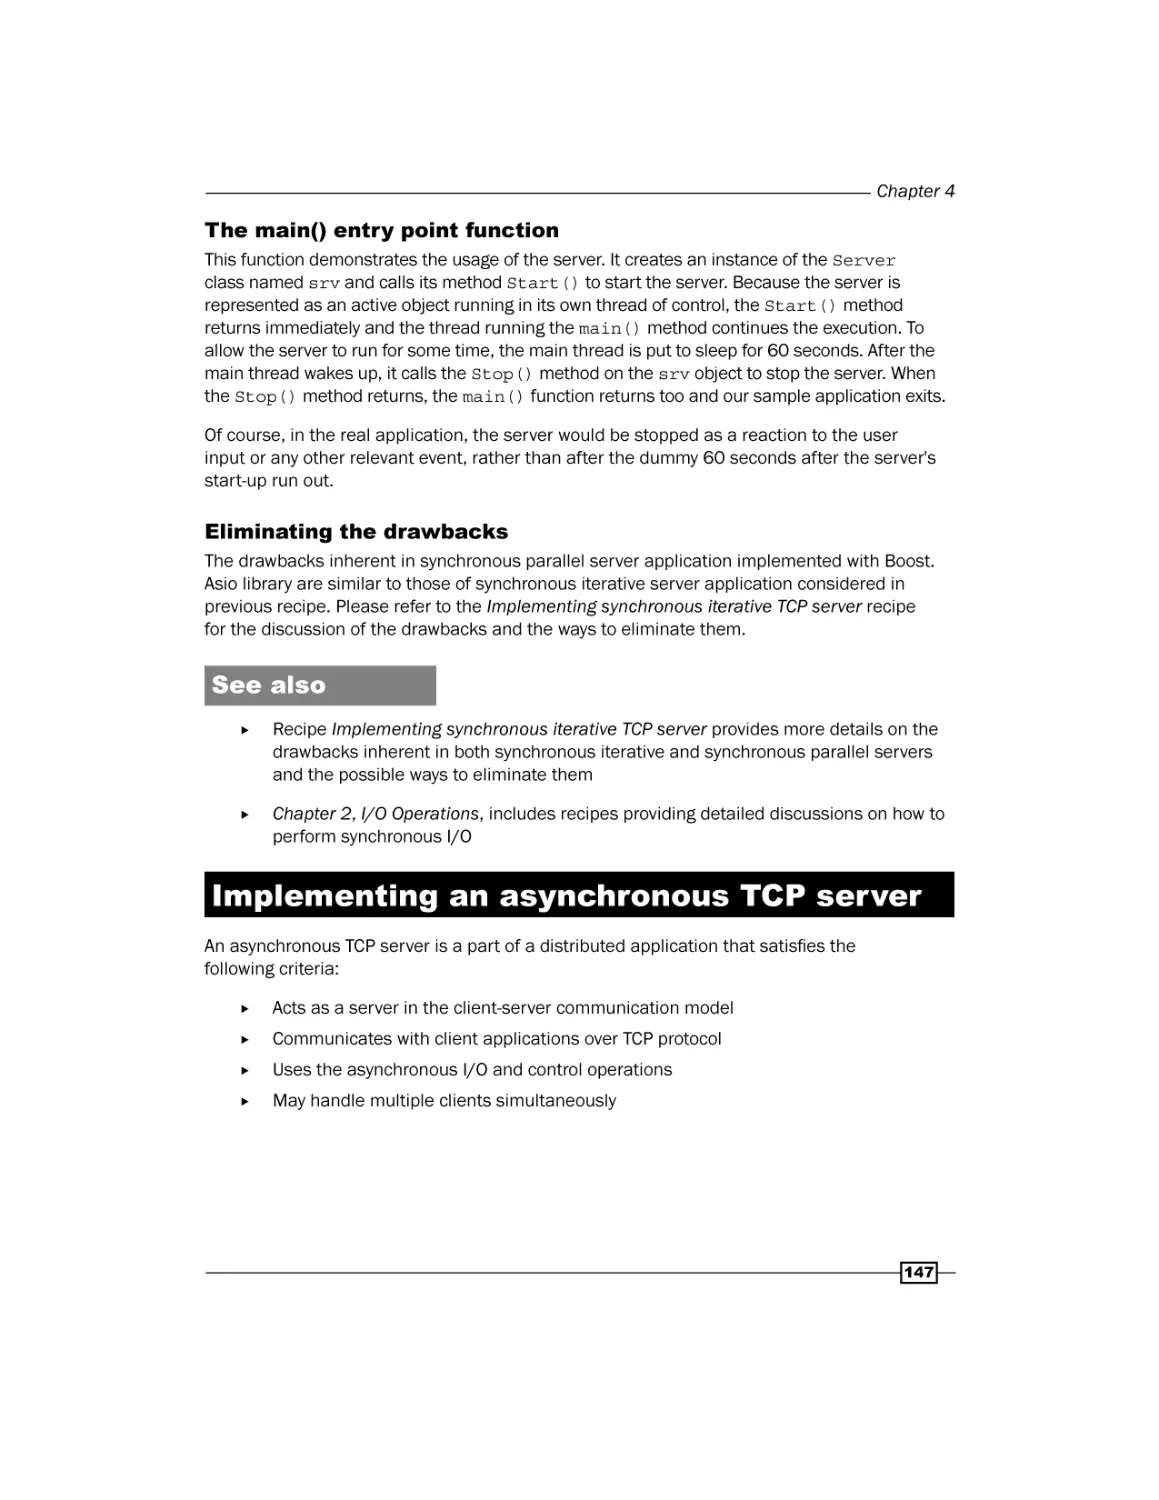 Implementing an asynchronous TCP server